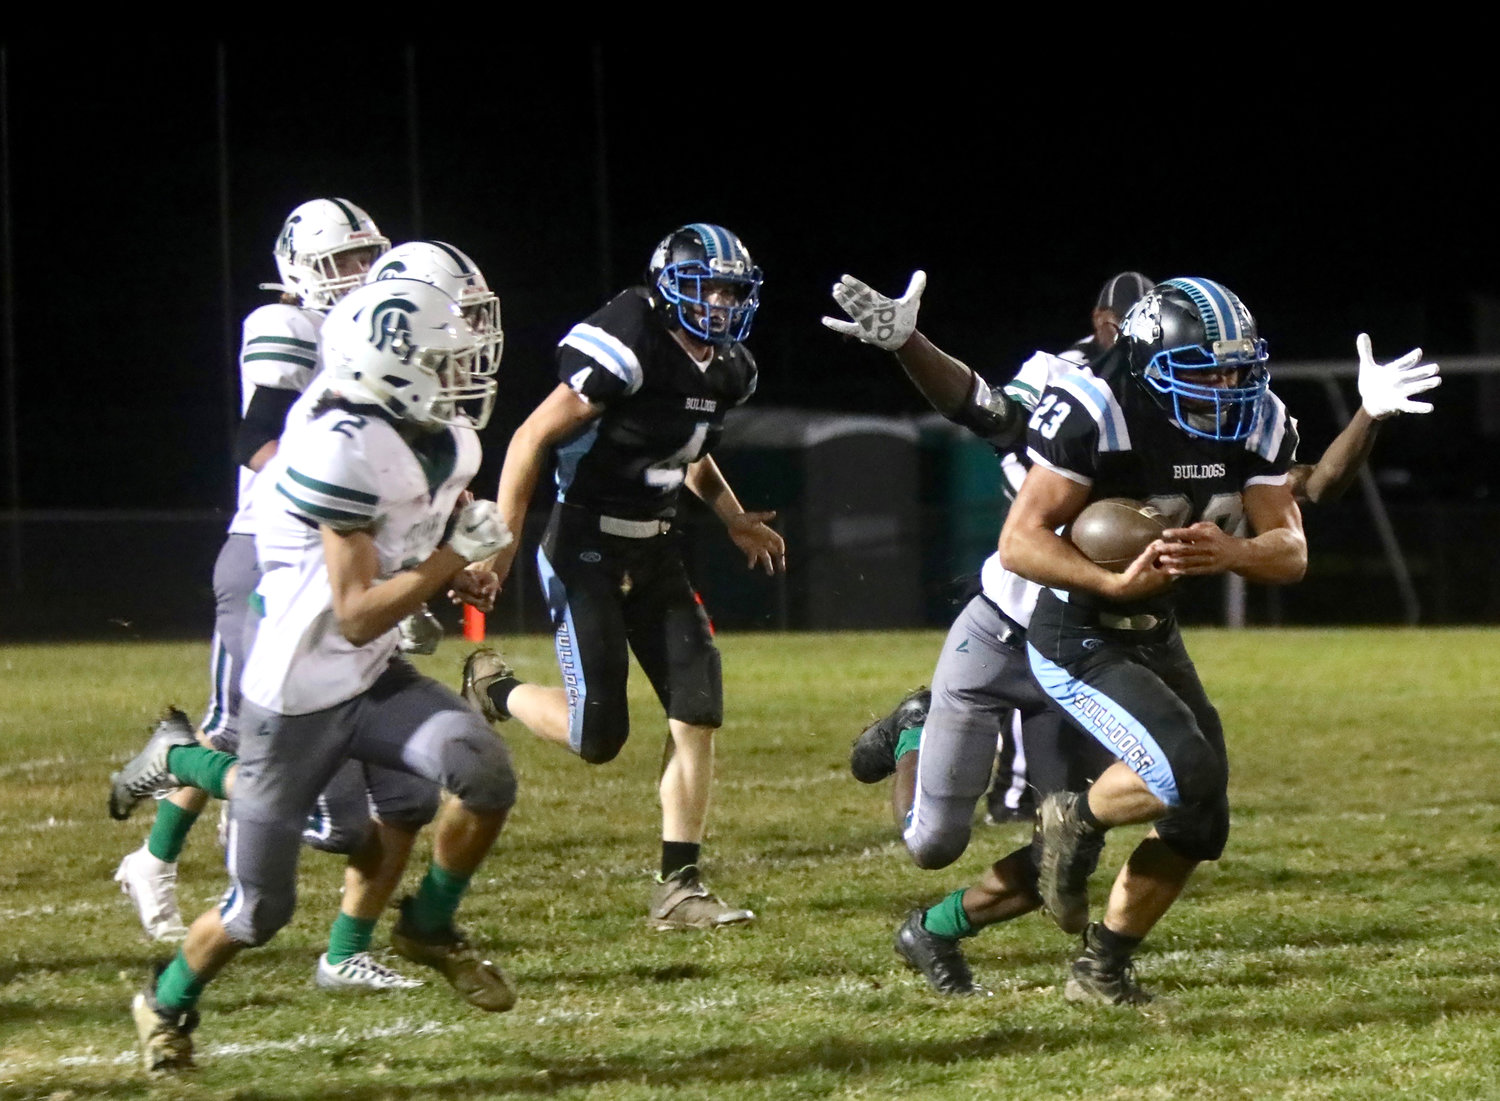 Rally Cruz breaks free for a long run that helped set up Sullivan West’s first TD scored by Andrew Hubert.